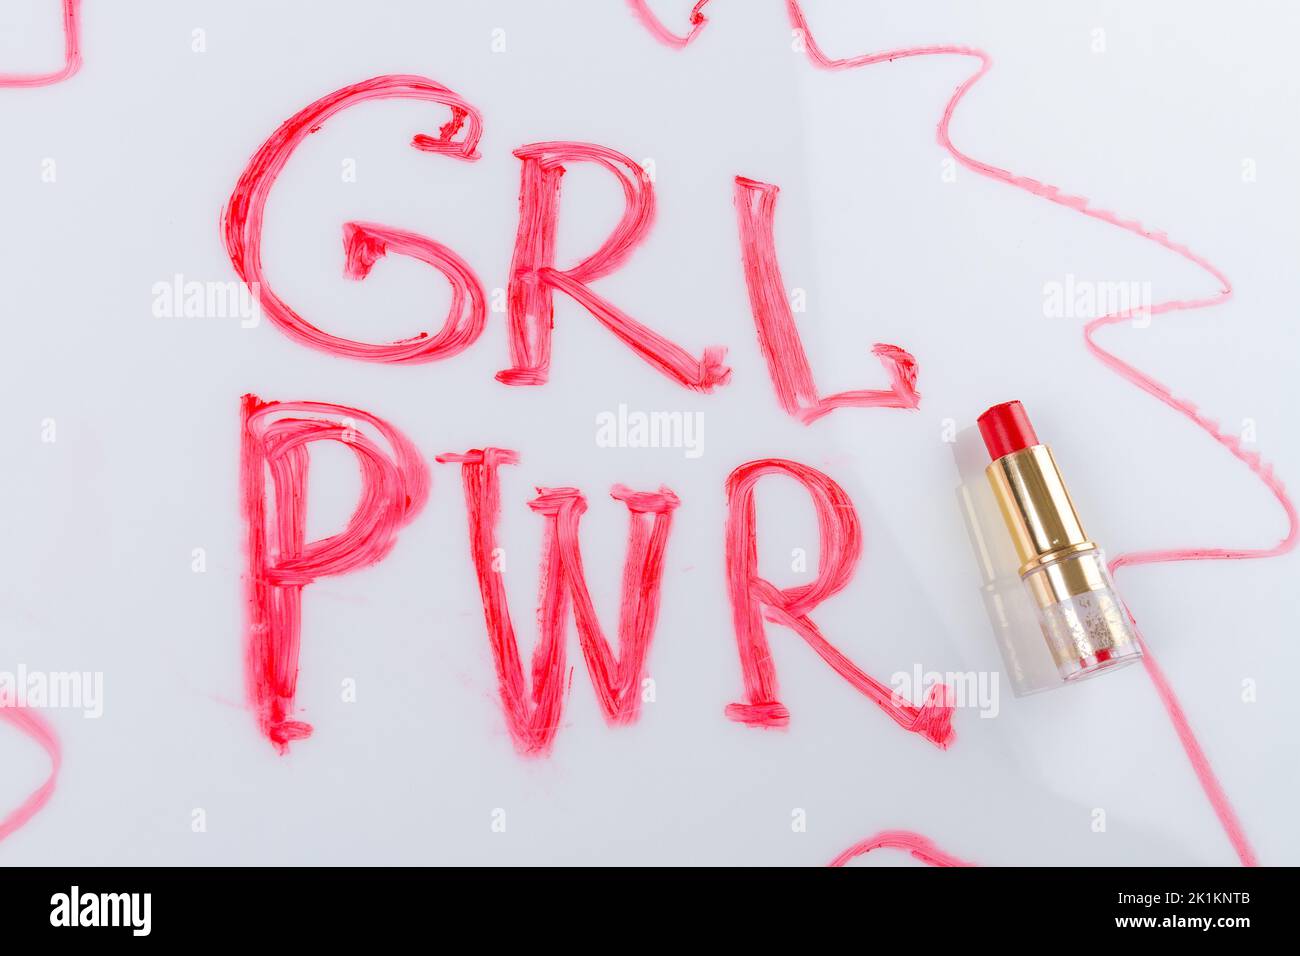 Grl pwr incription and red lipstick isolated on white background. Girl power concept. Stock Photo